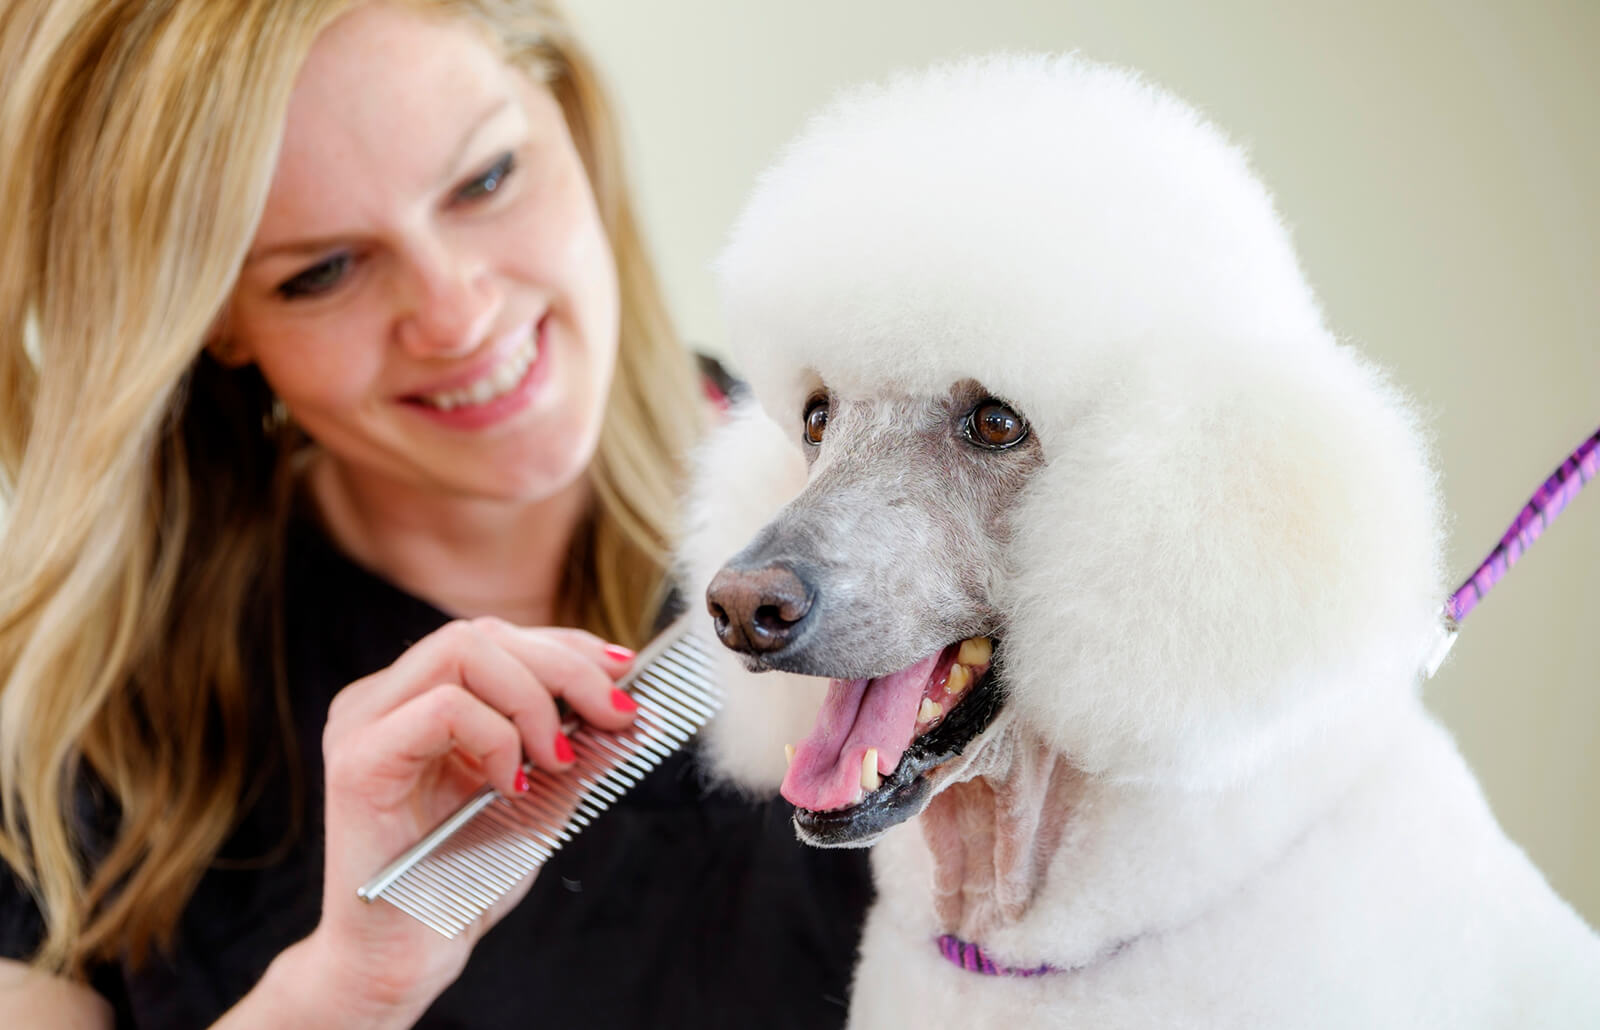 styling options for your poodle's face